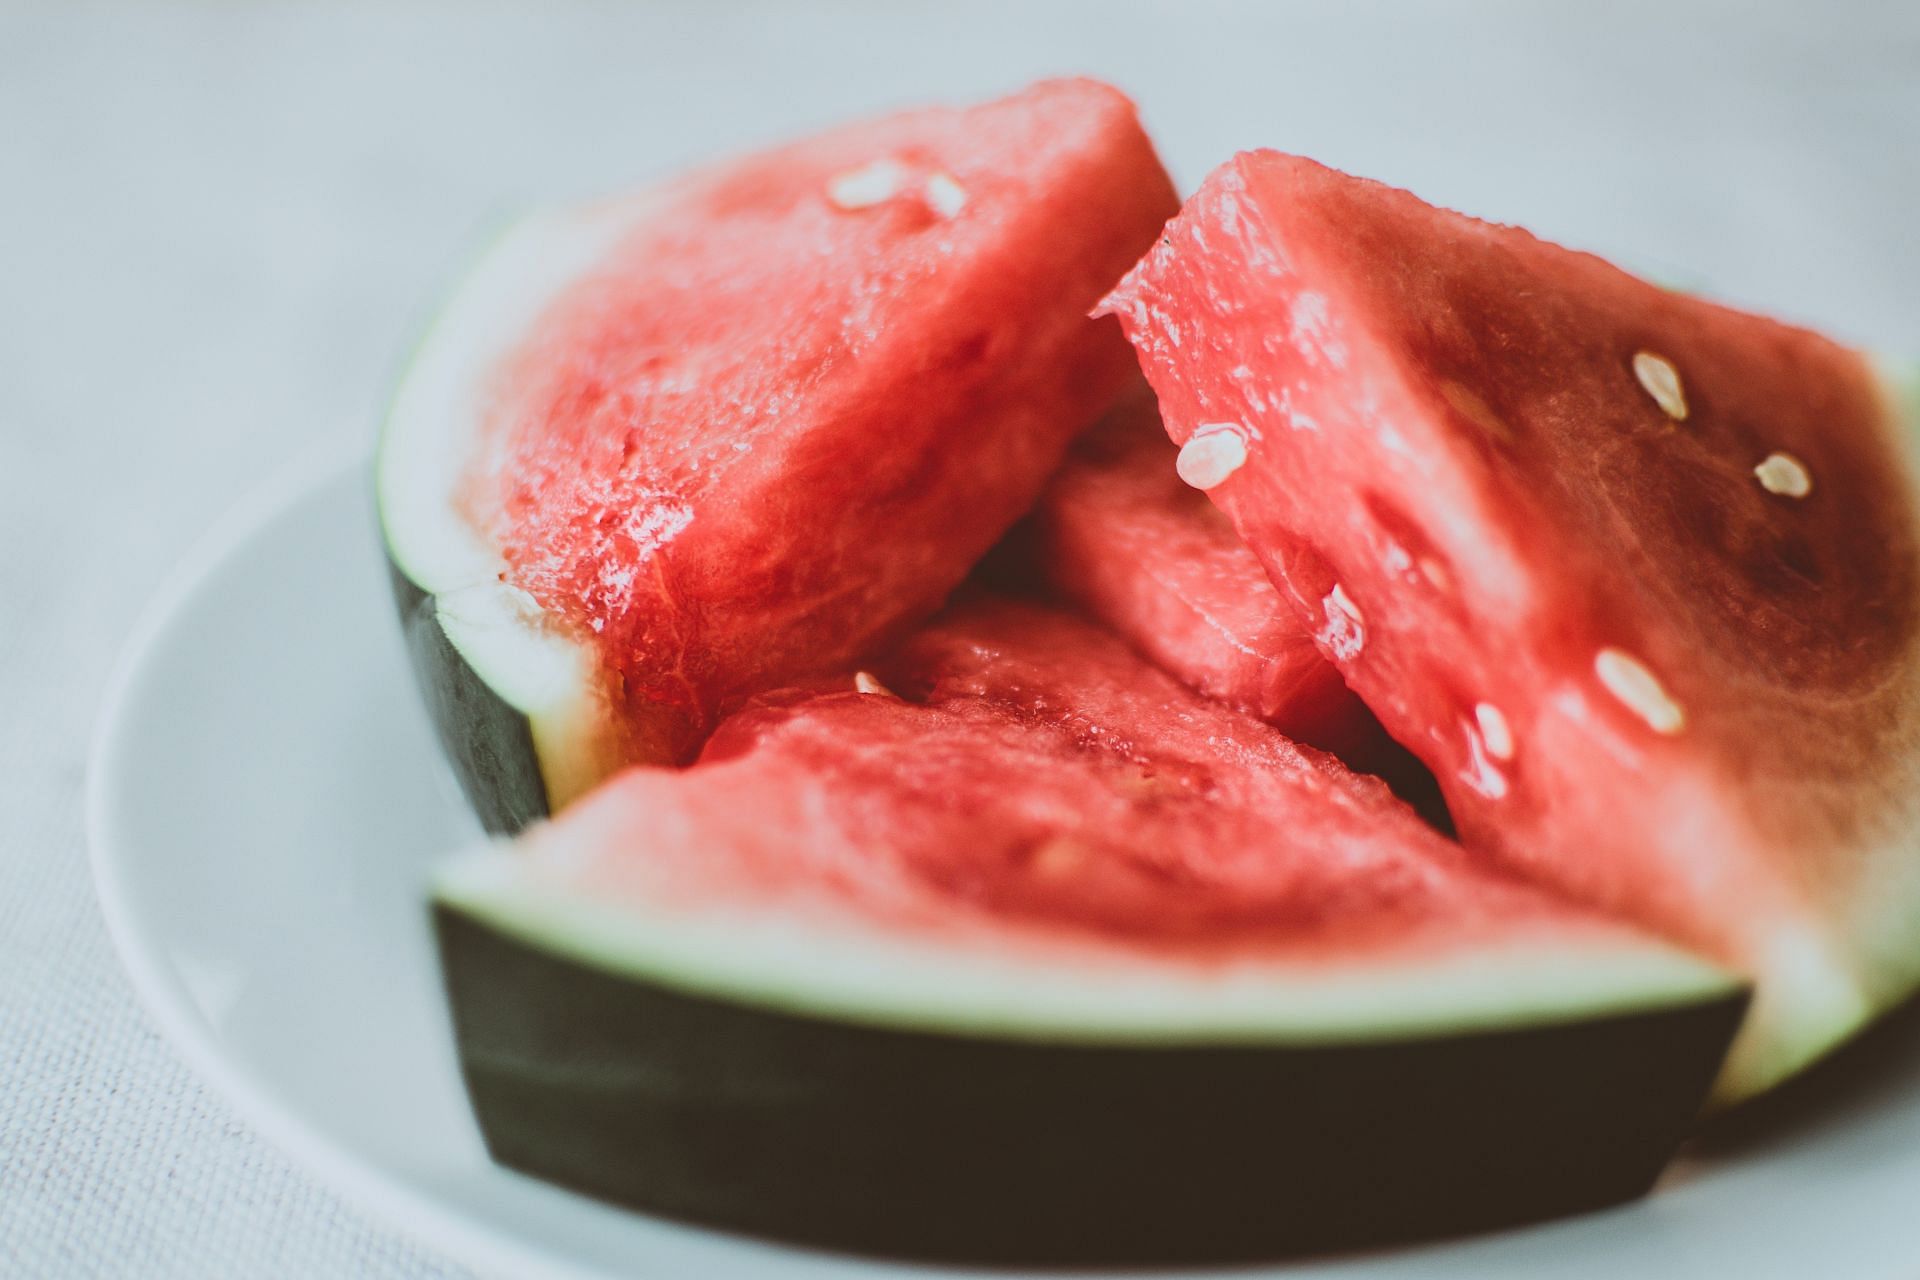 Benefits of Watermelon for reducing water weight (image sourced via Pexels / Photo by Lisa Fotios)